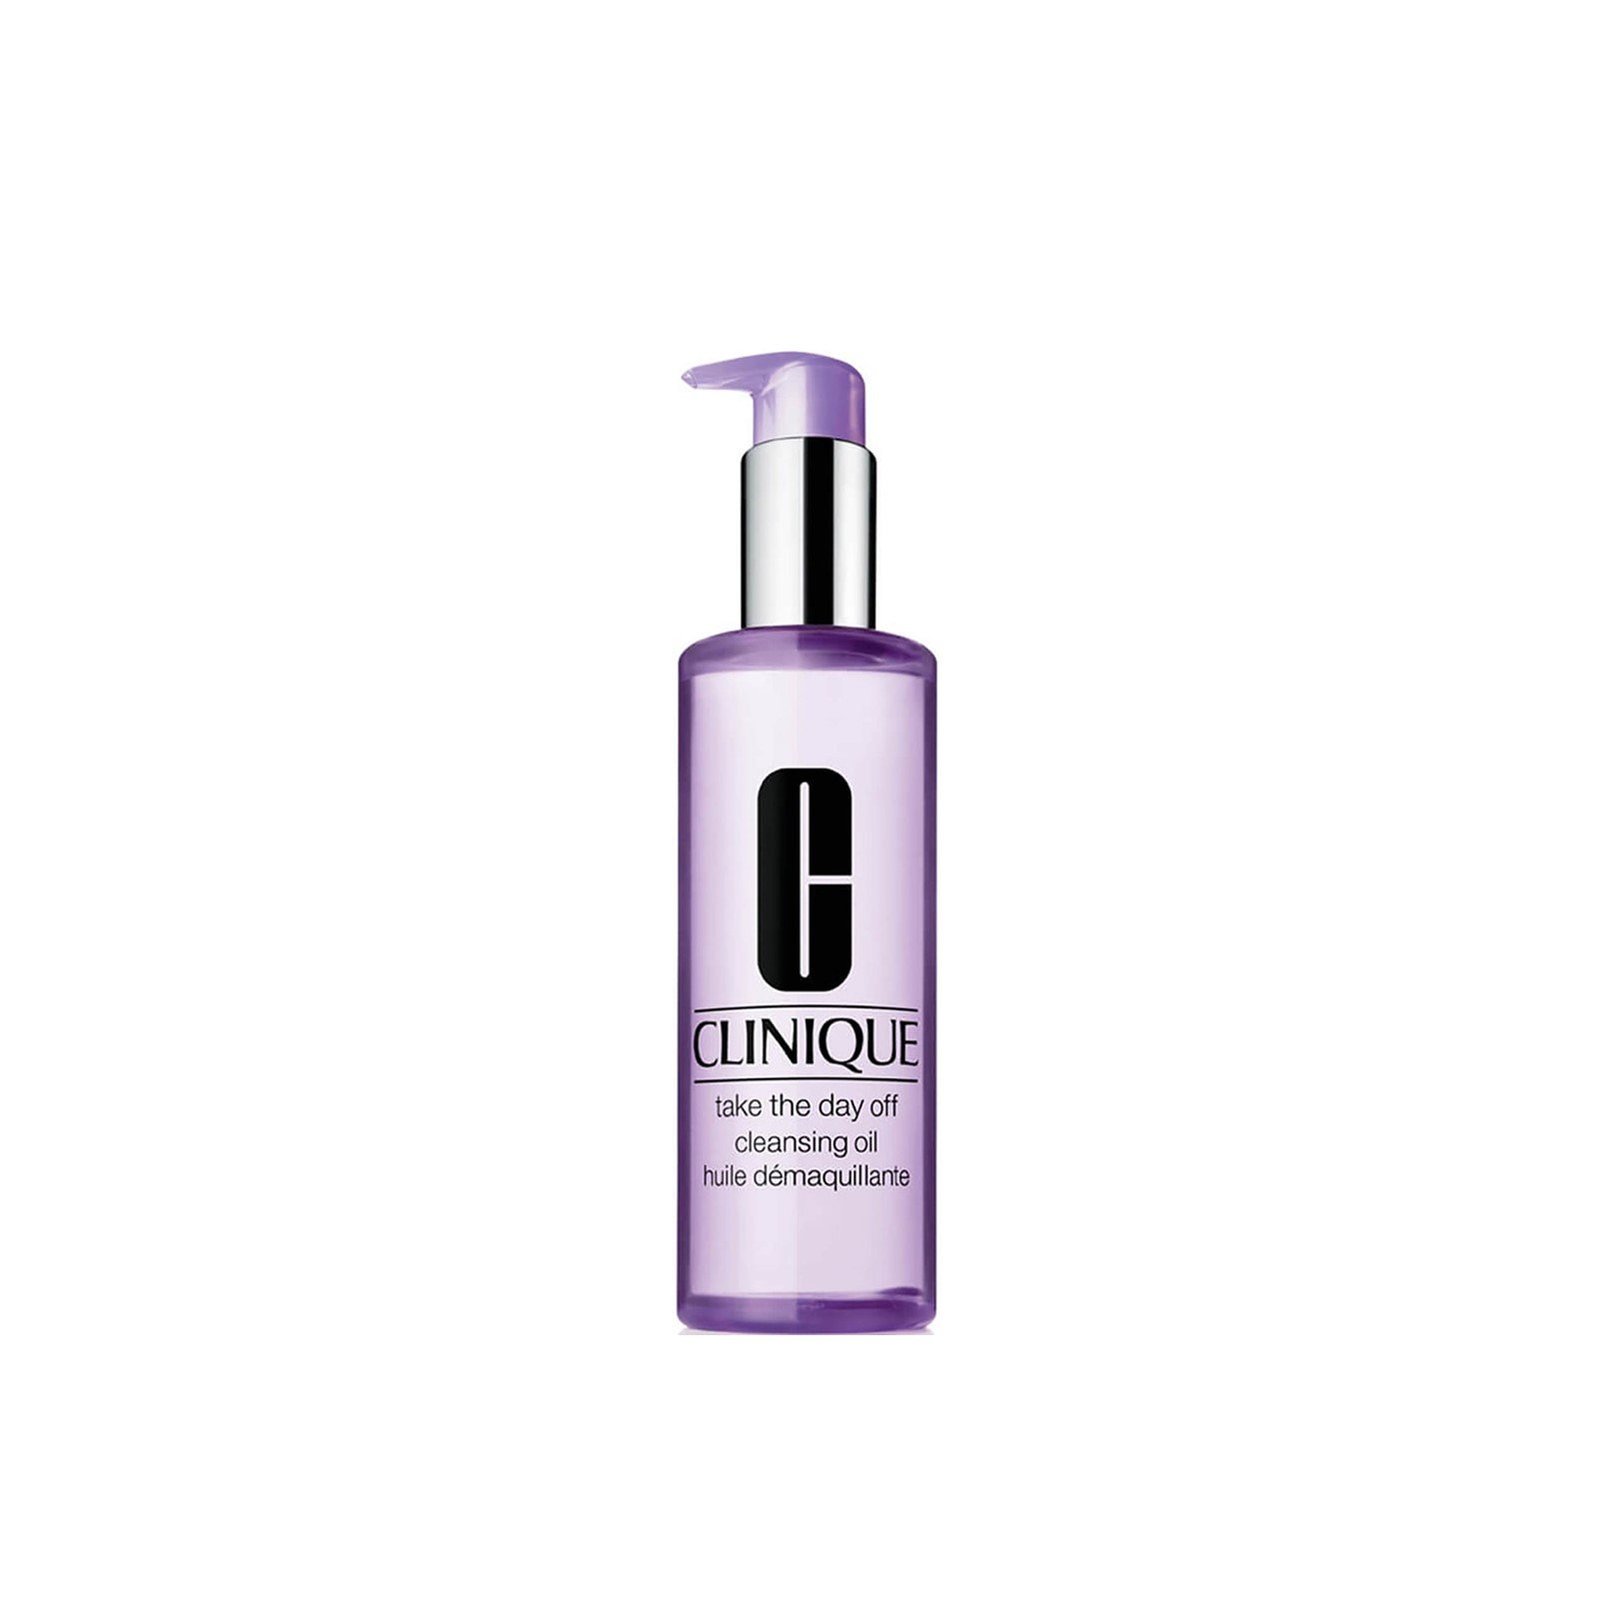 Clinique Take The Day Off Cleansing Oil 200ml (6.7floz)